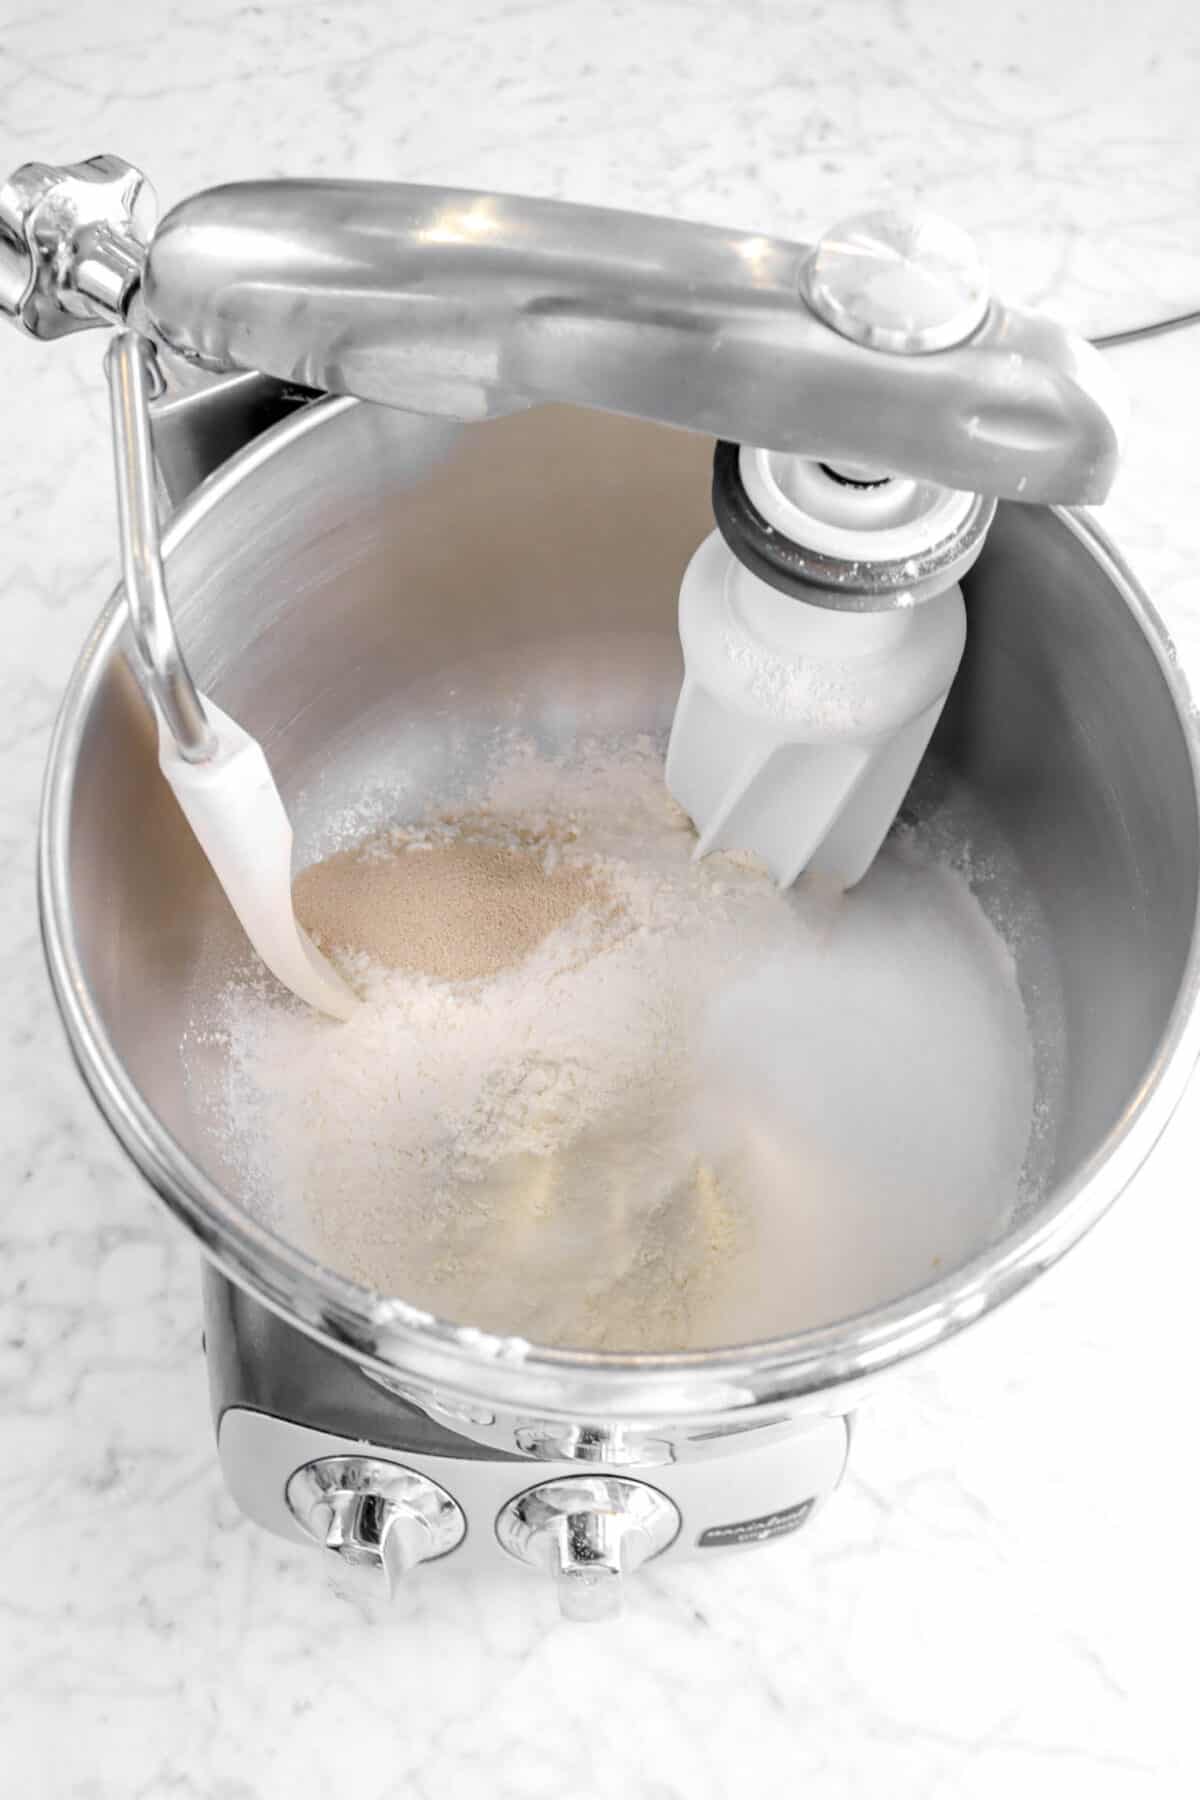 yeast, flour, and sugar in mixer